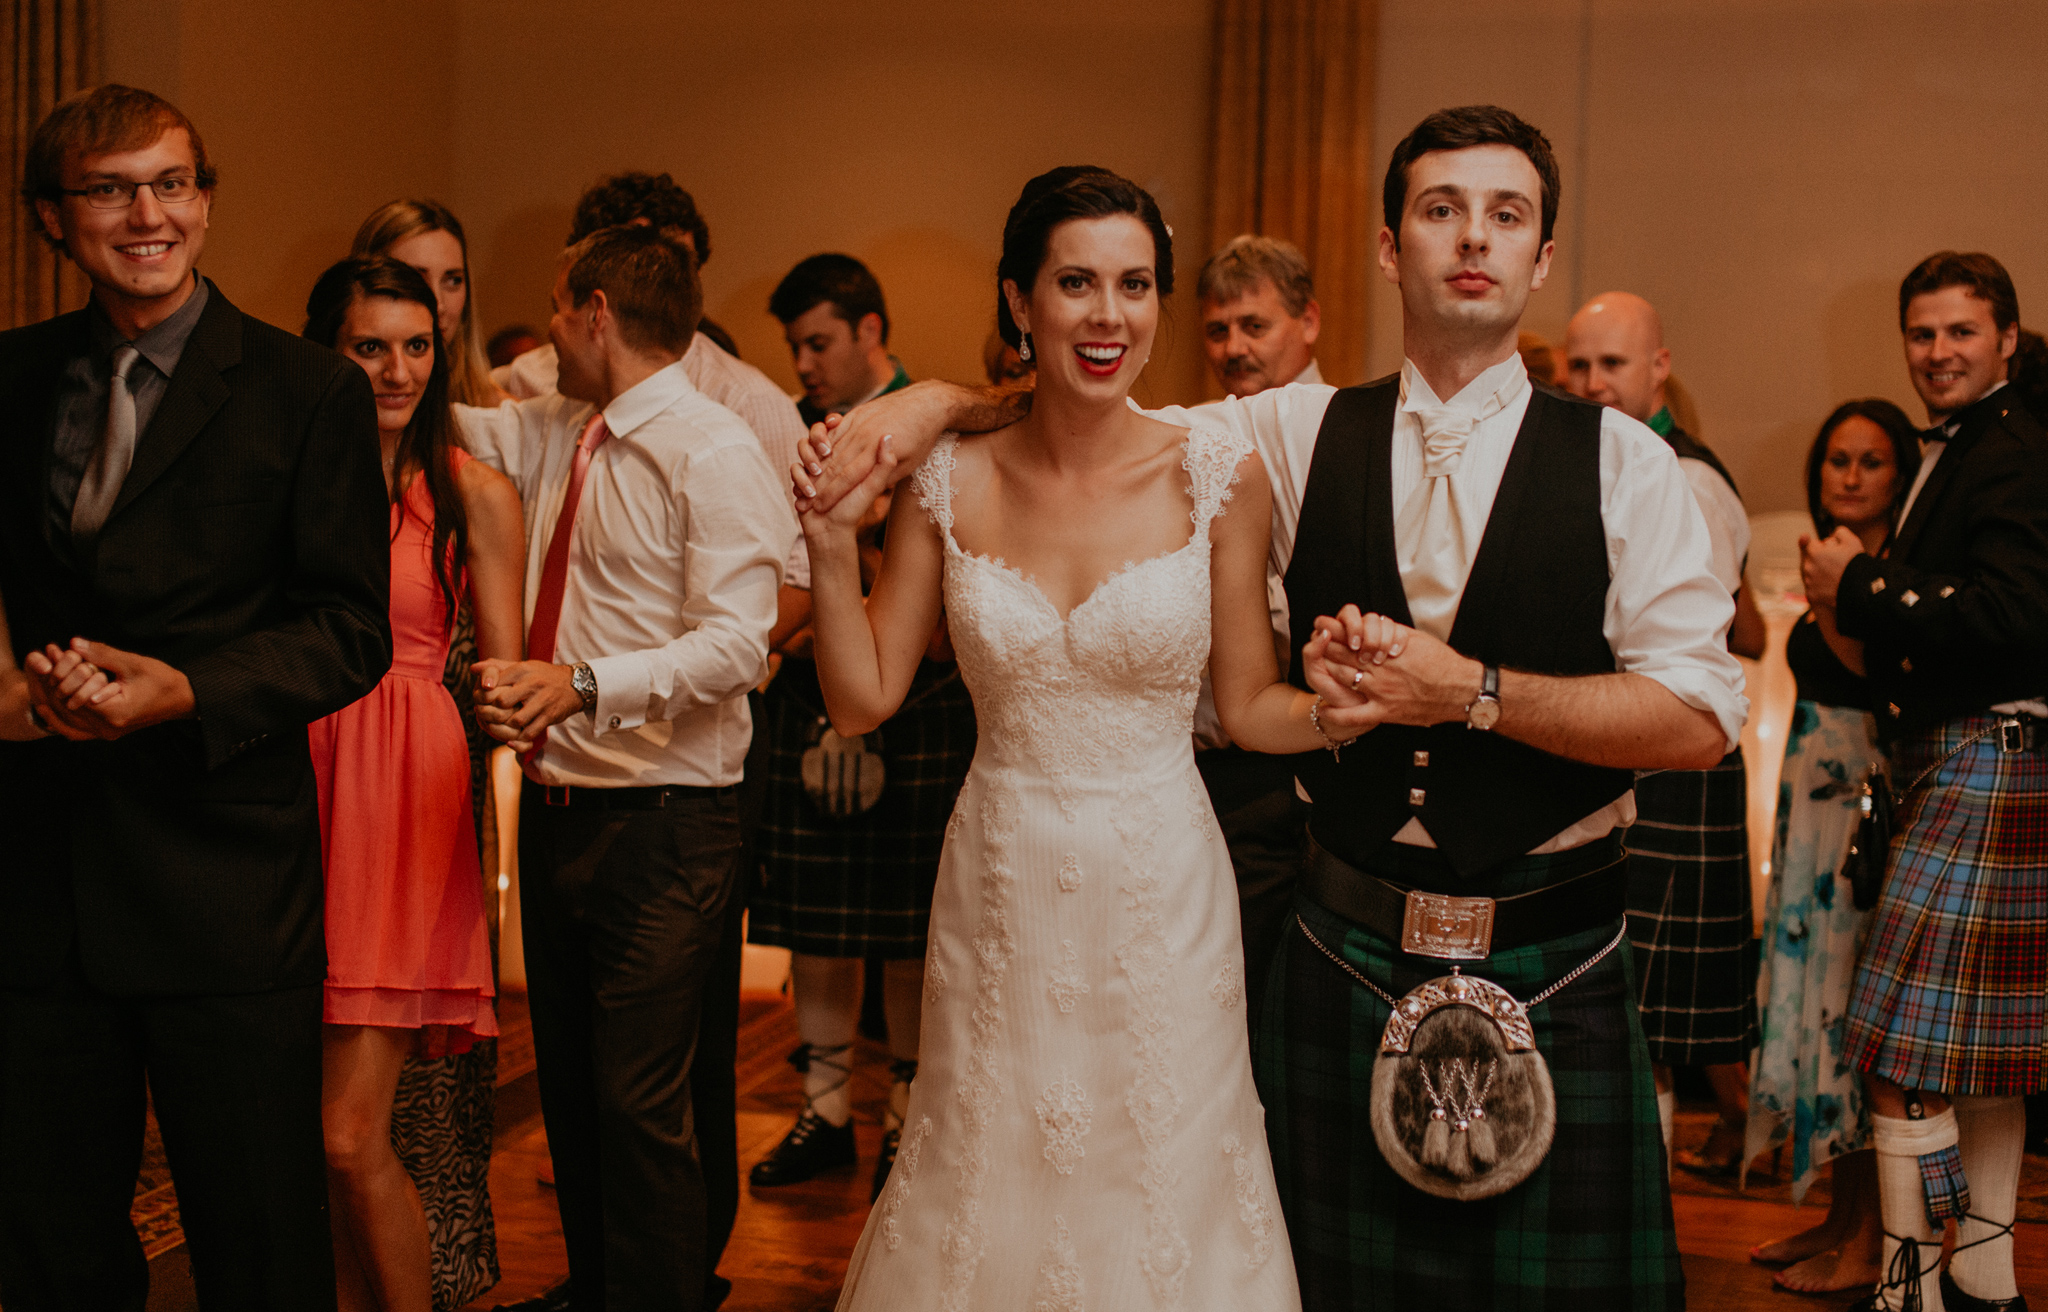 Scottish bride and groom do a traditional dance in kilt